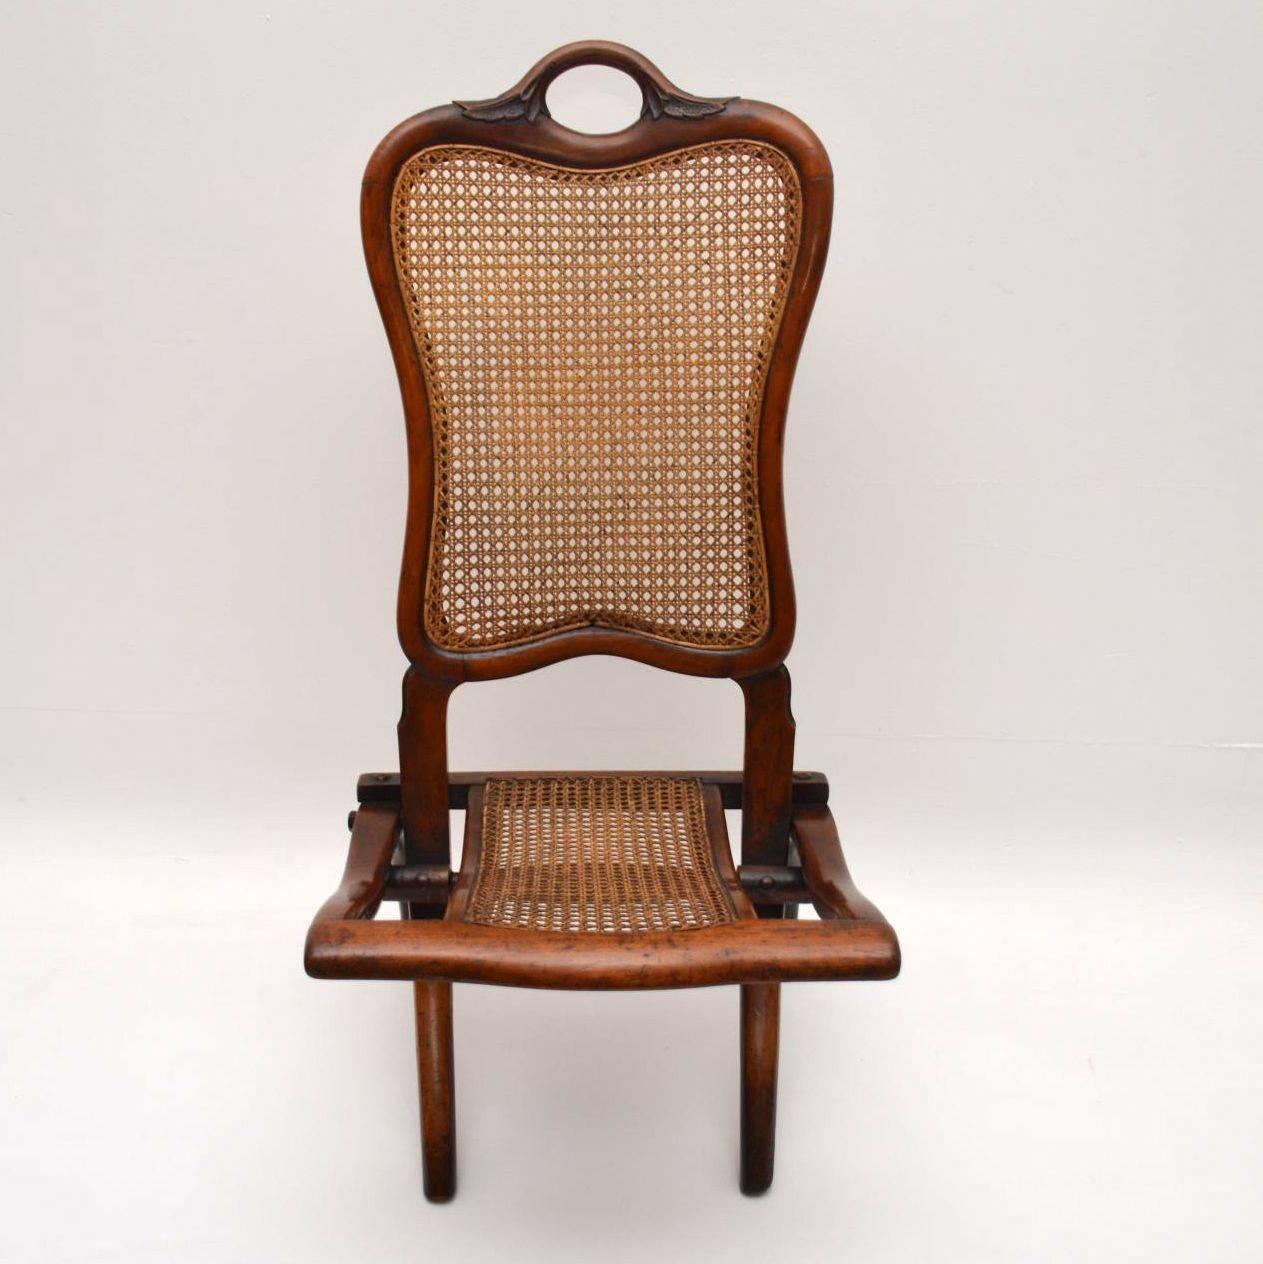 This antique Victorian mahogany and cane folding chair could have been made for use as a picnic or Campaign chair. Either way, it was definitely made for travelling purposes. It's beautifully made too, with the handle carved into the top of the